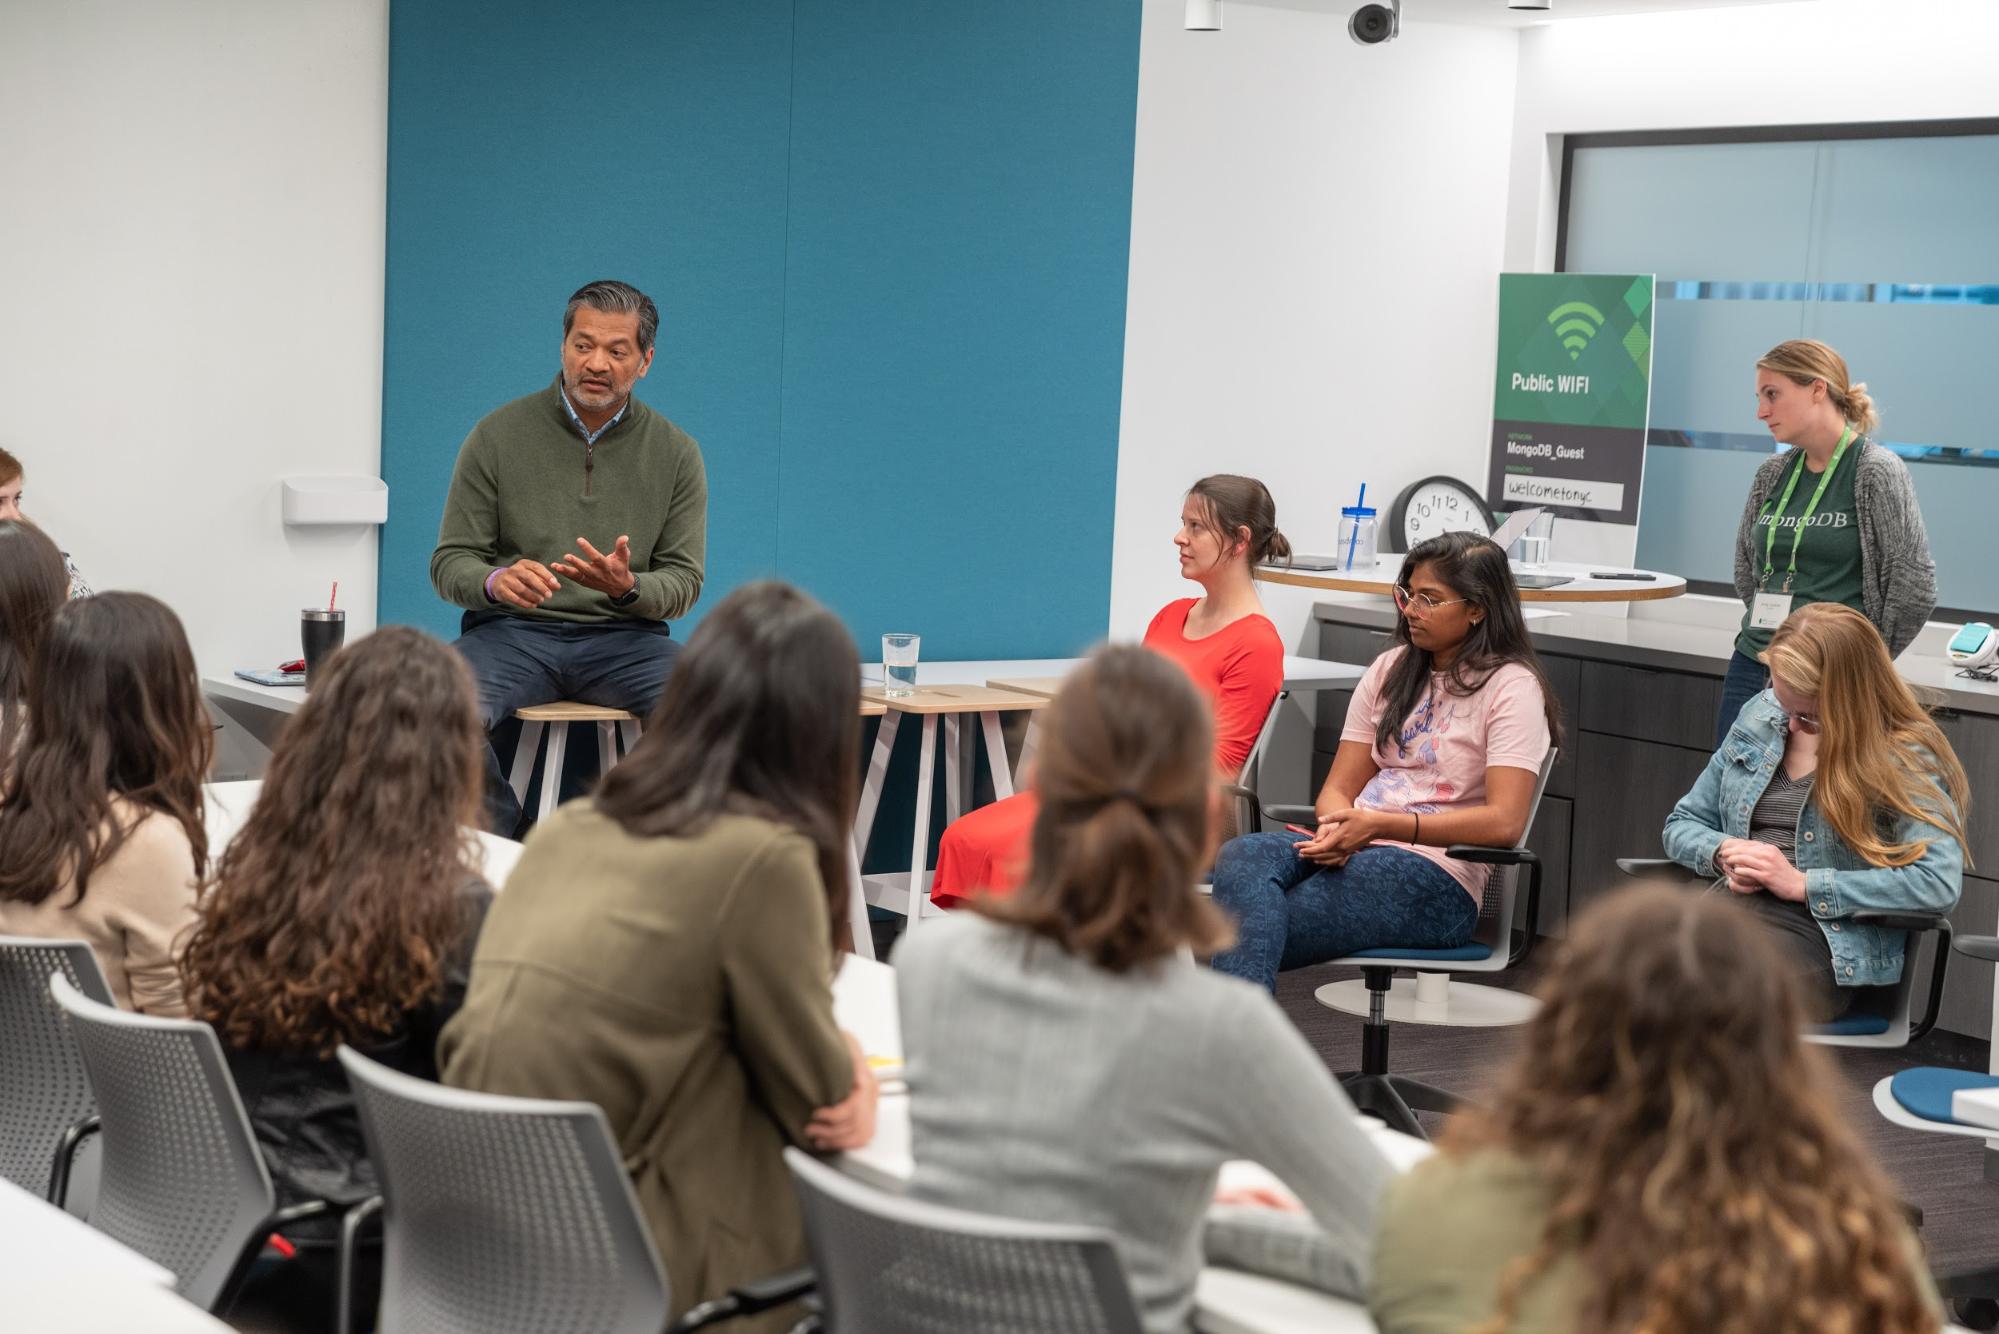 MongoDB CEO Dev Ittycheria talks about importance of diversity to group